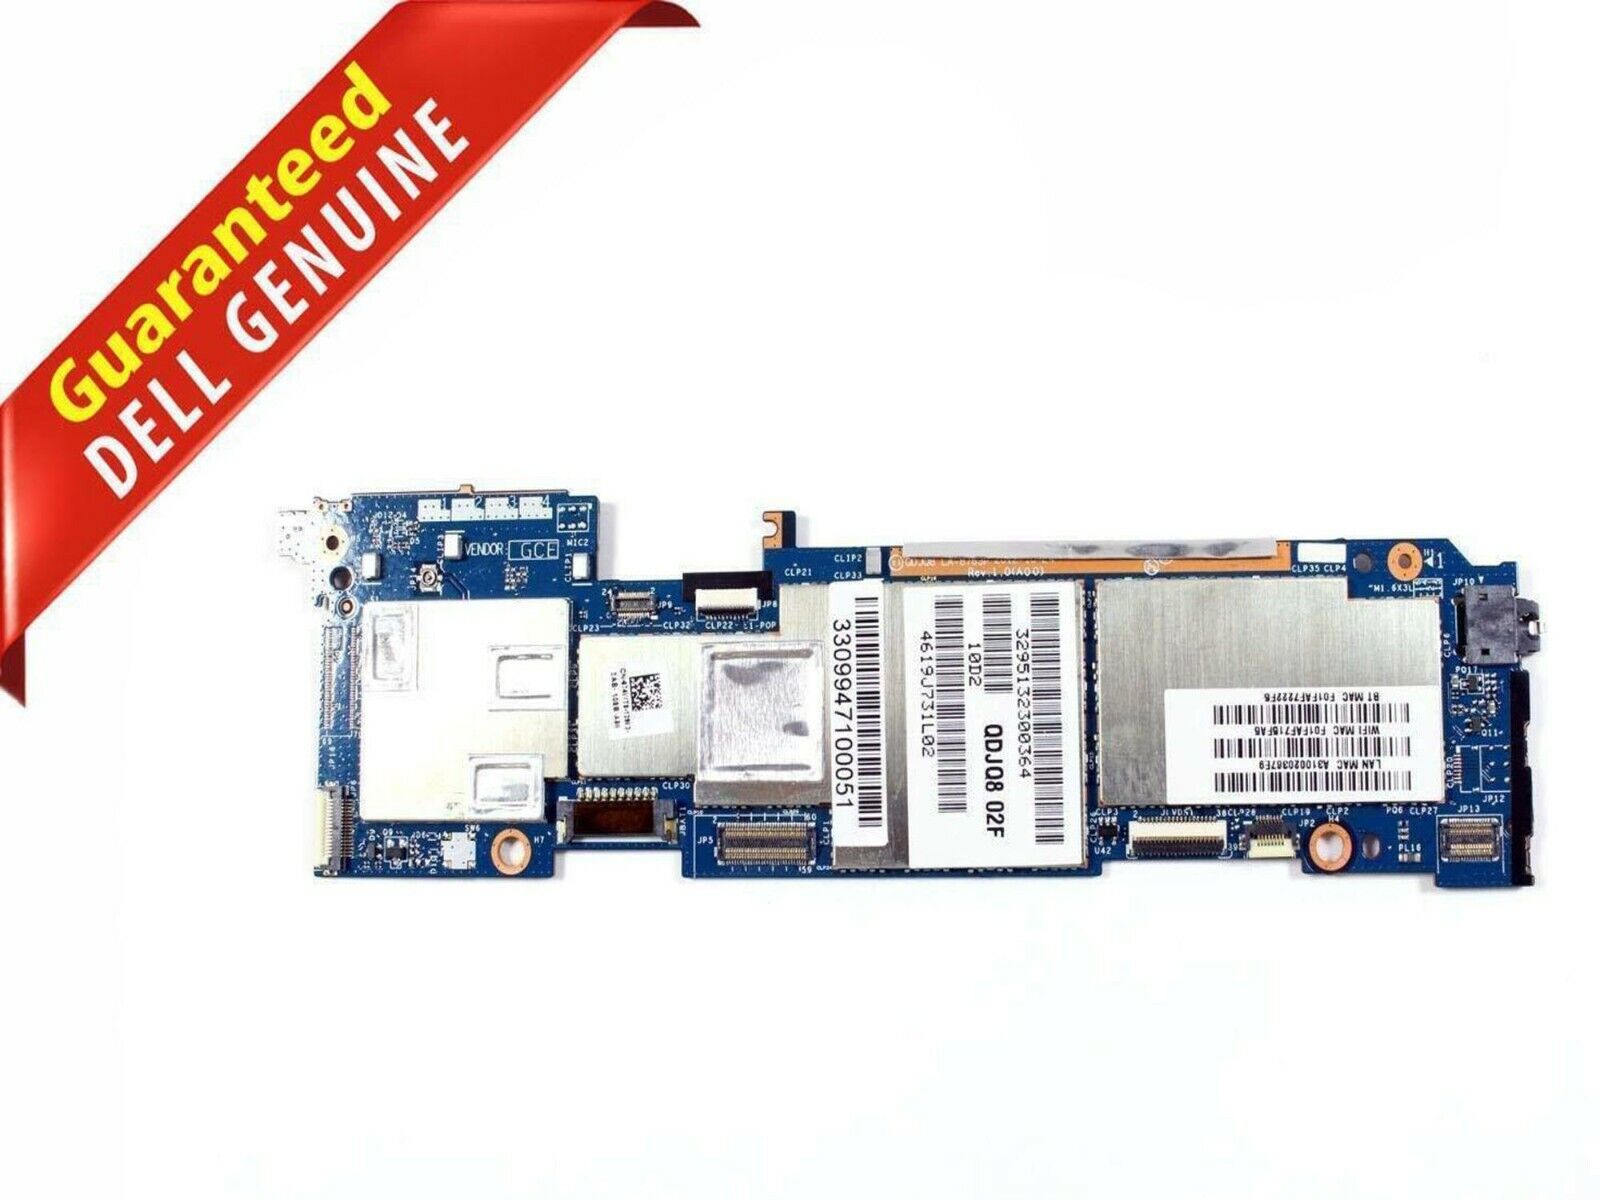 New Genuine Dell XPS 10 RT Tablet Motherboard System Board OS windows 74WT8